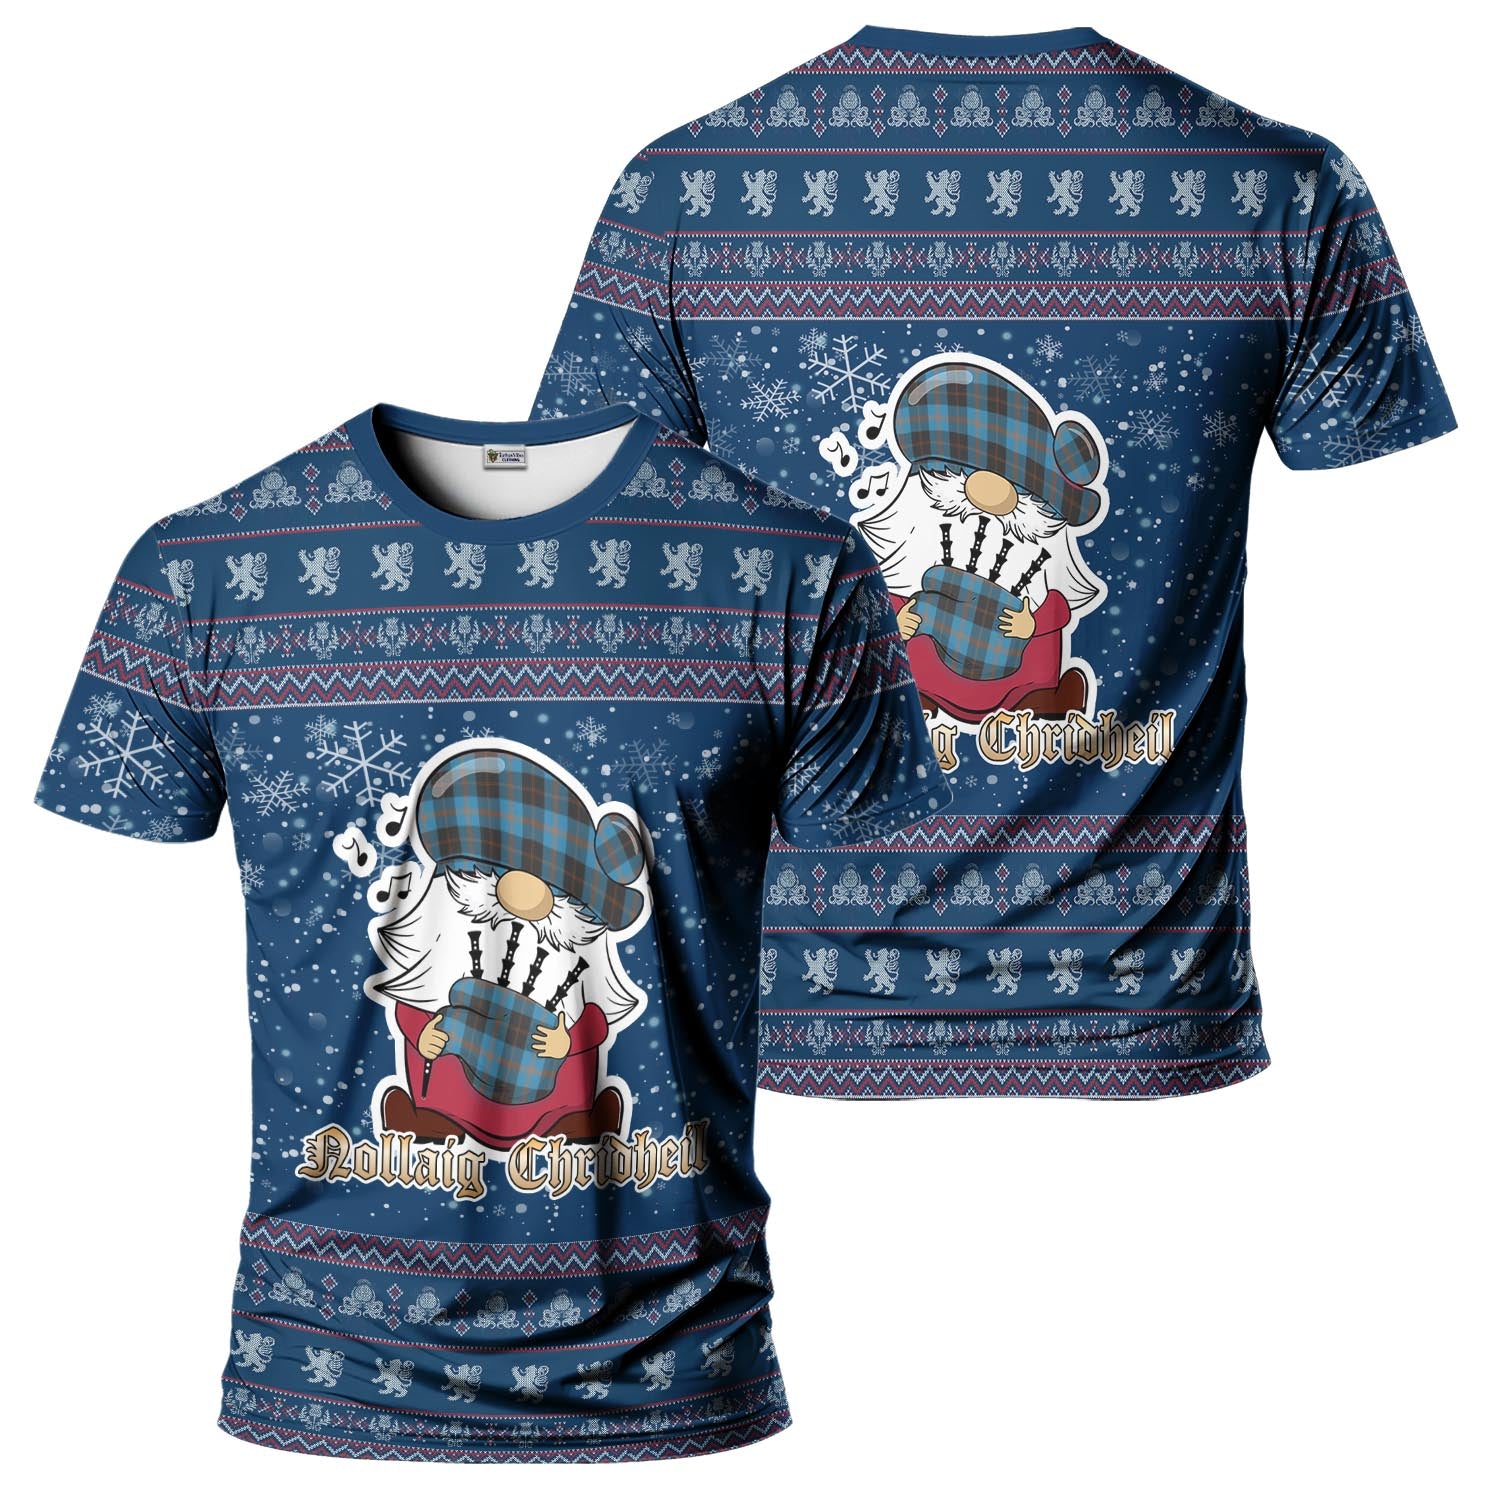 Garden Clan Christmas Family T-Shirt with Funny Gnome Playing Bagpipes Kid's Shirt Blue - Tartanvibesclothing